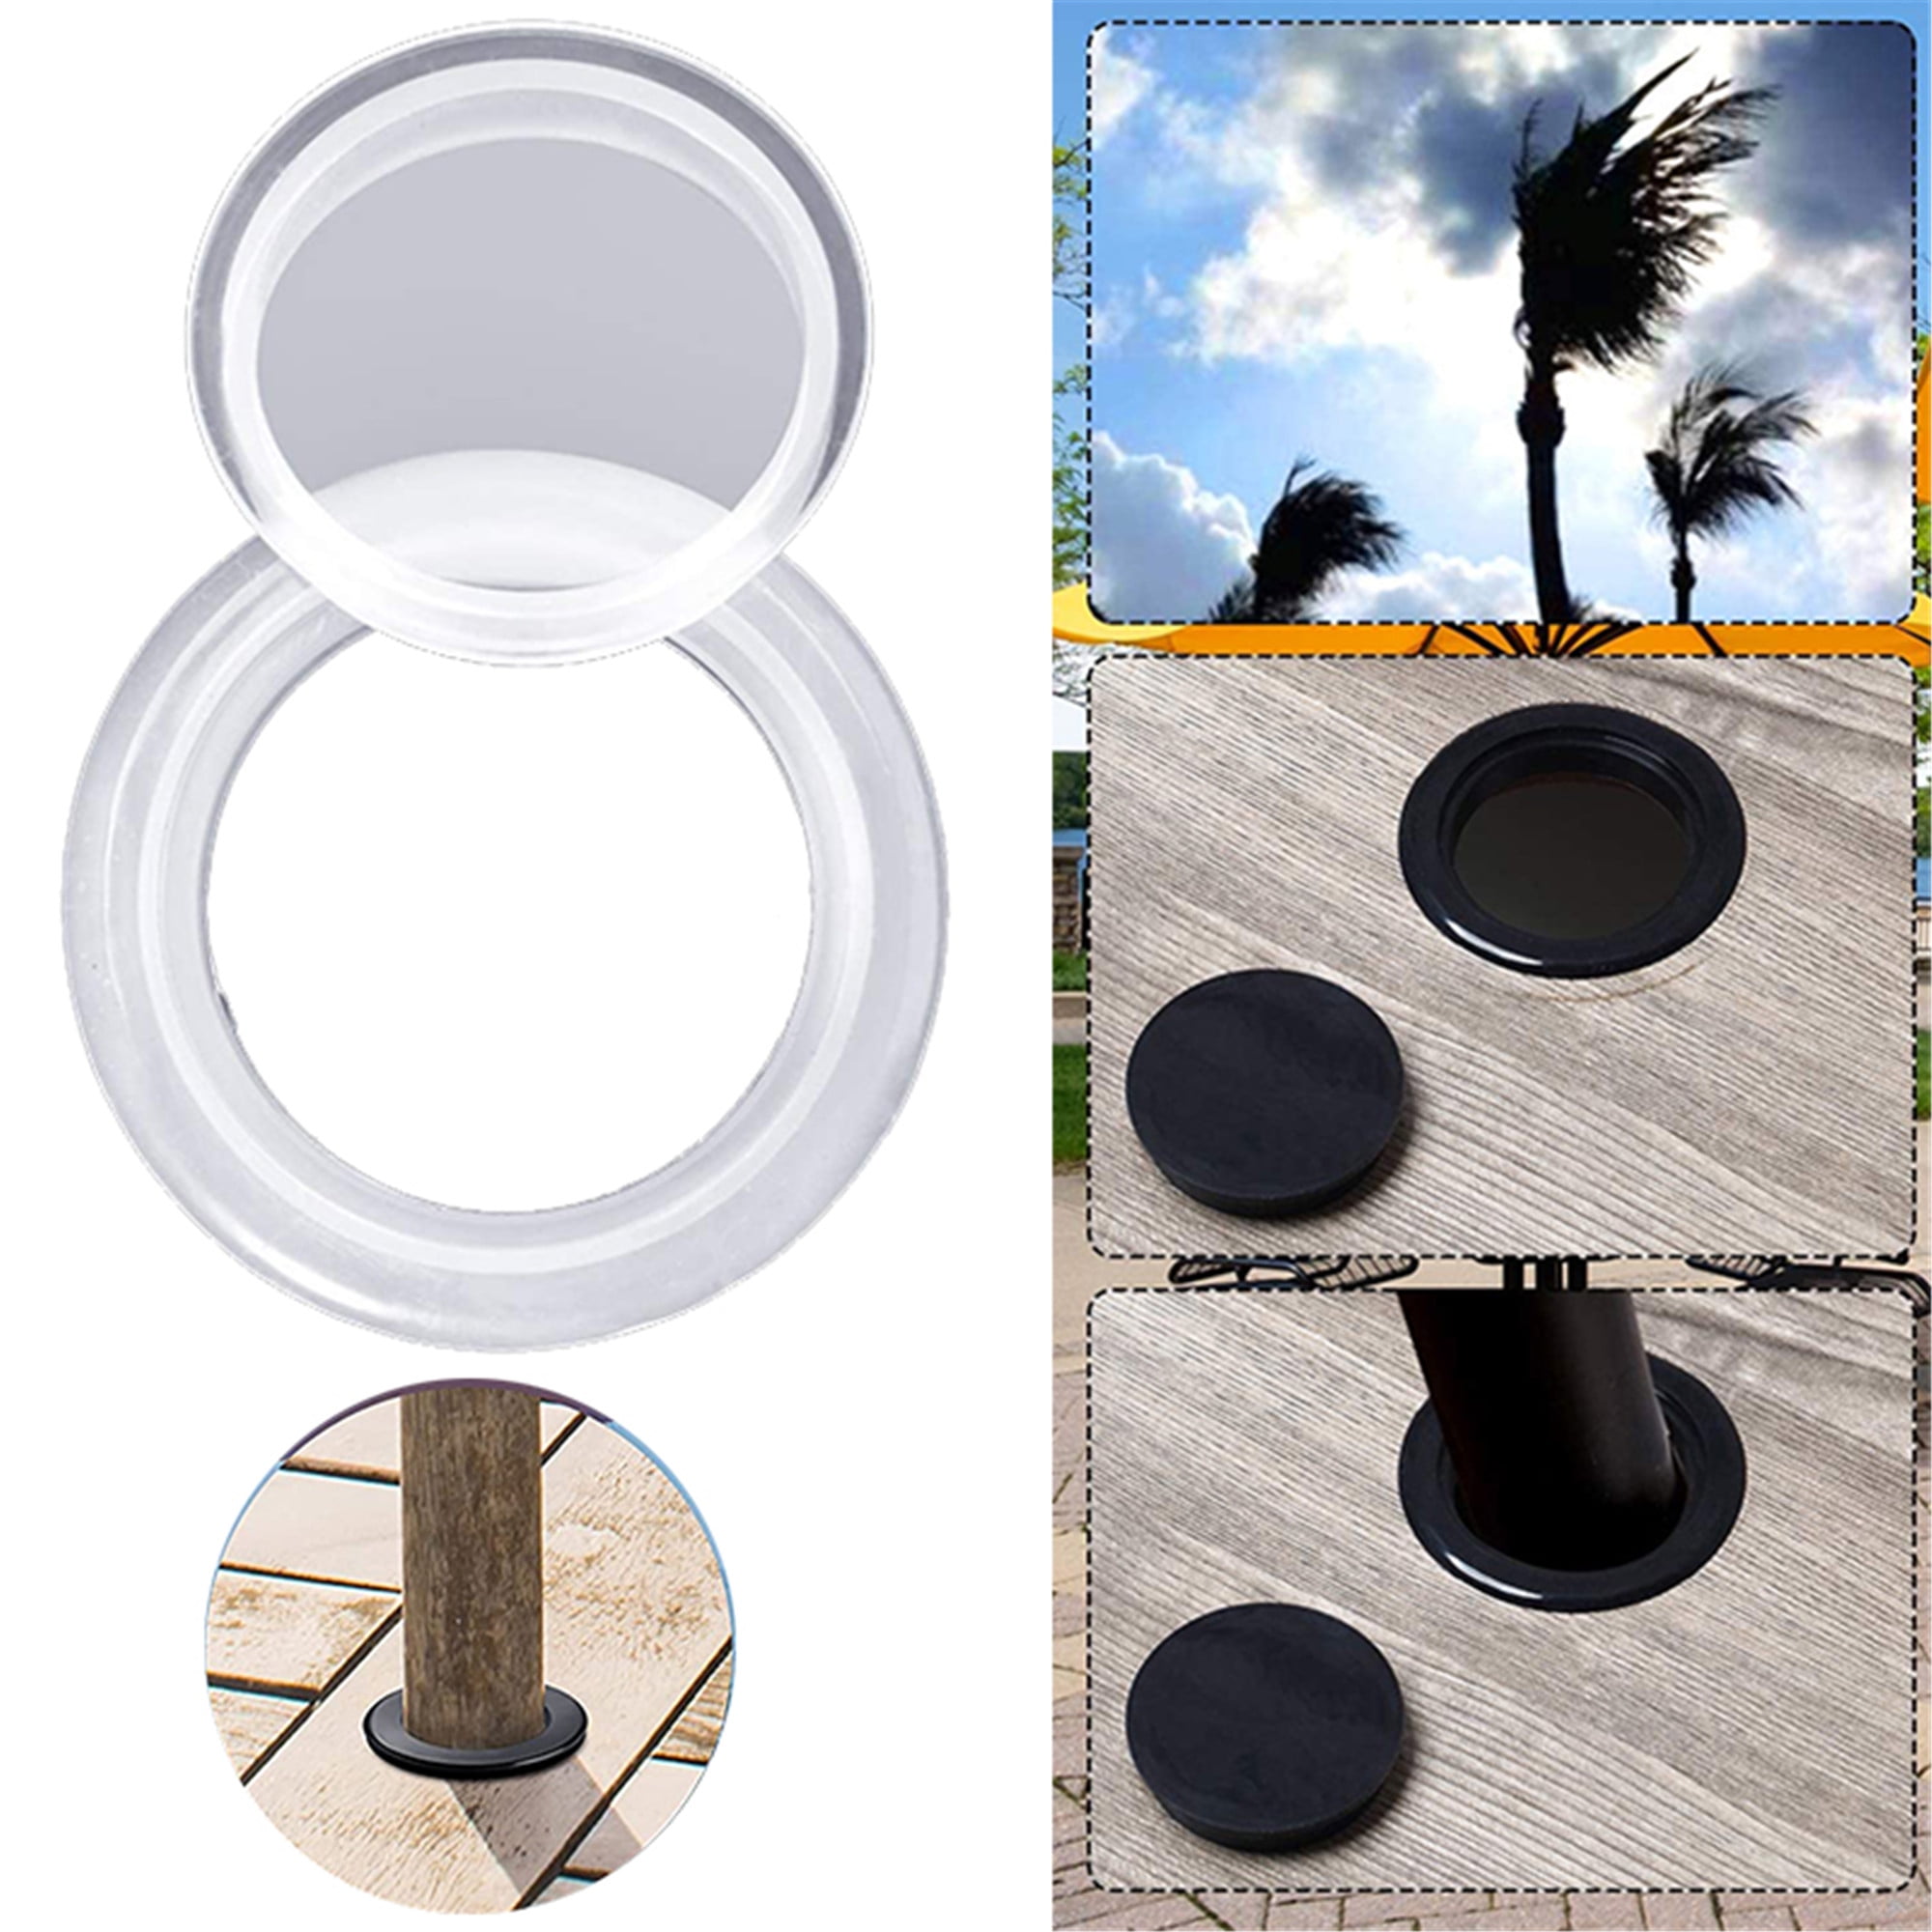 Hole Ring and Cap 2 Inch Standard Table Hole Silicone Umbrella Hole Ring Plug and Cap Set for Glass Outdoors Patio Garden Table Deck Yard 2 PCS Hole Ring and Cap Set Black,White 